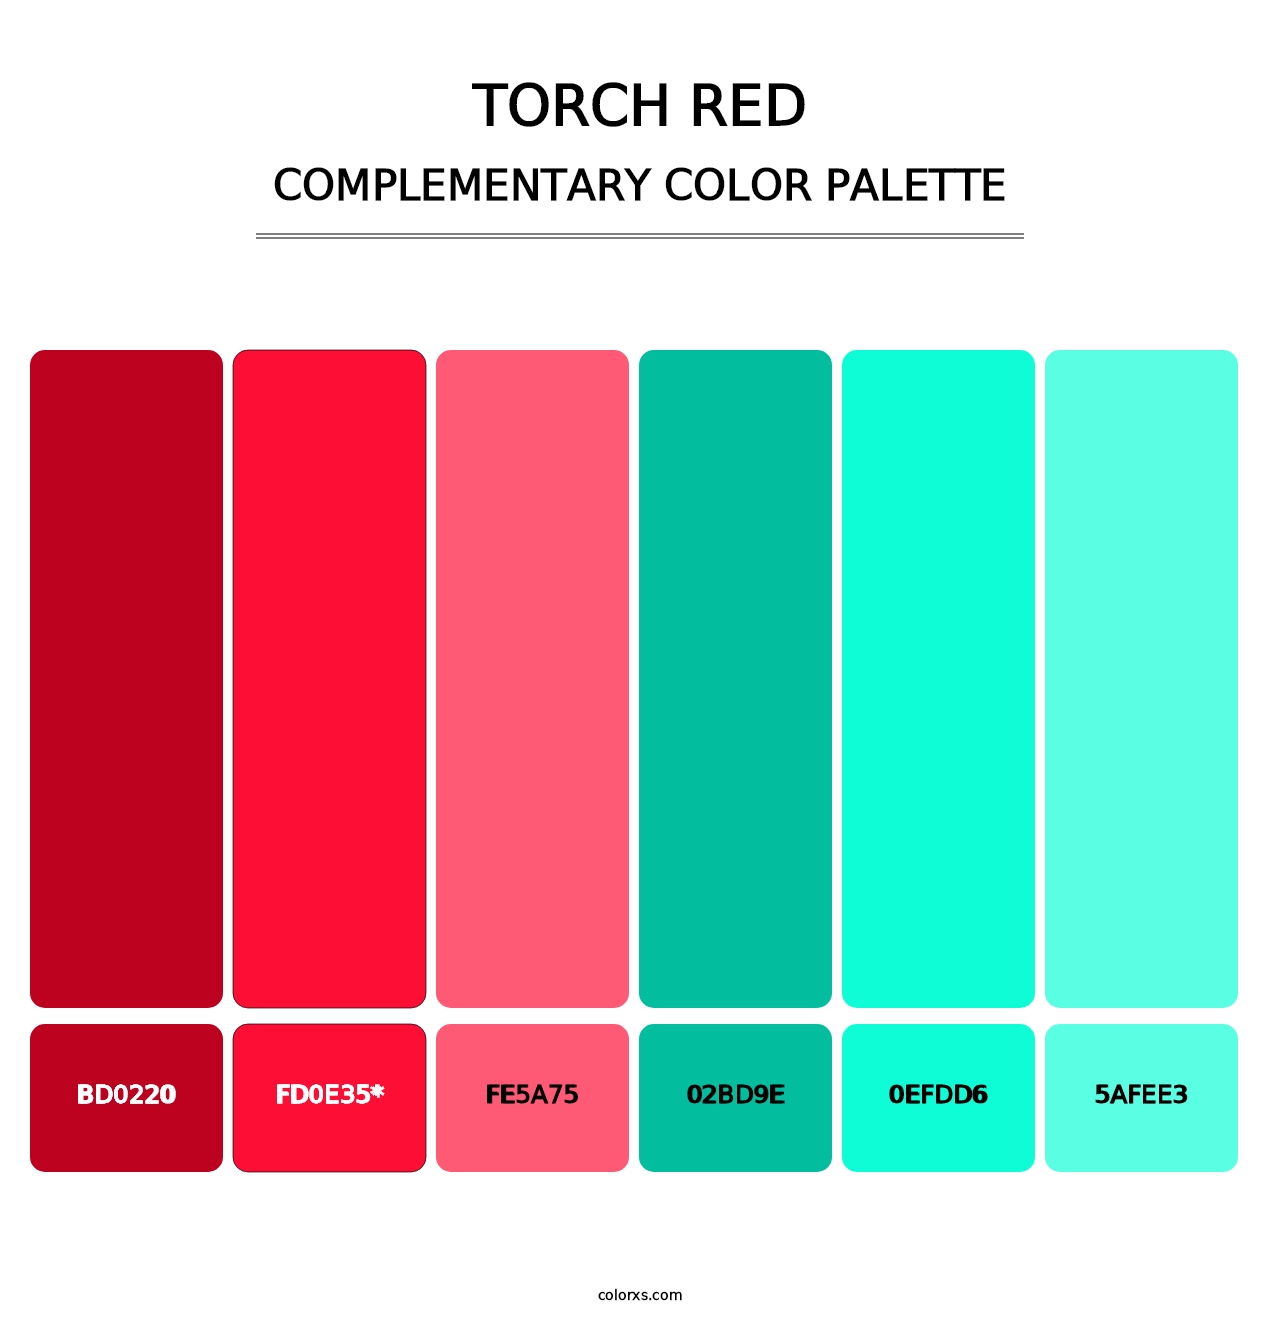 Torch Red - Complementary Color Palette